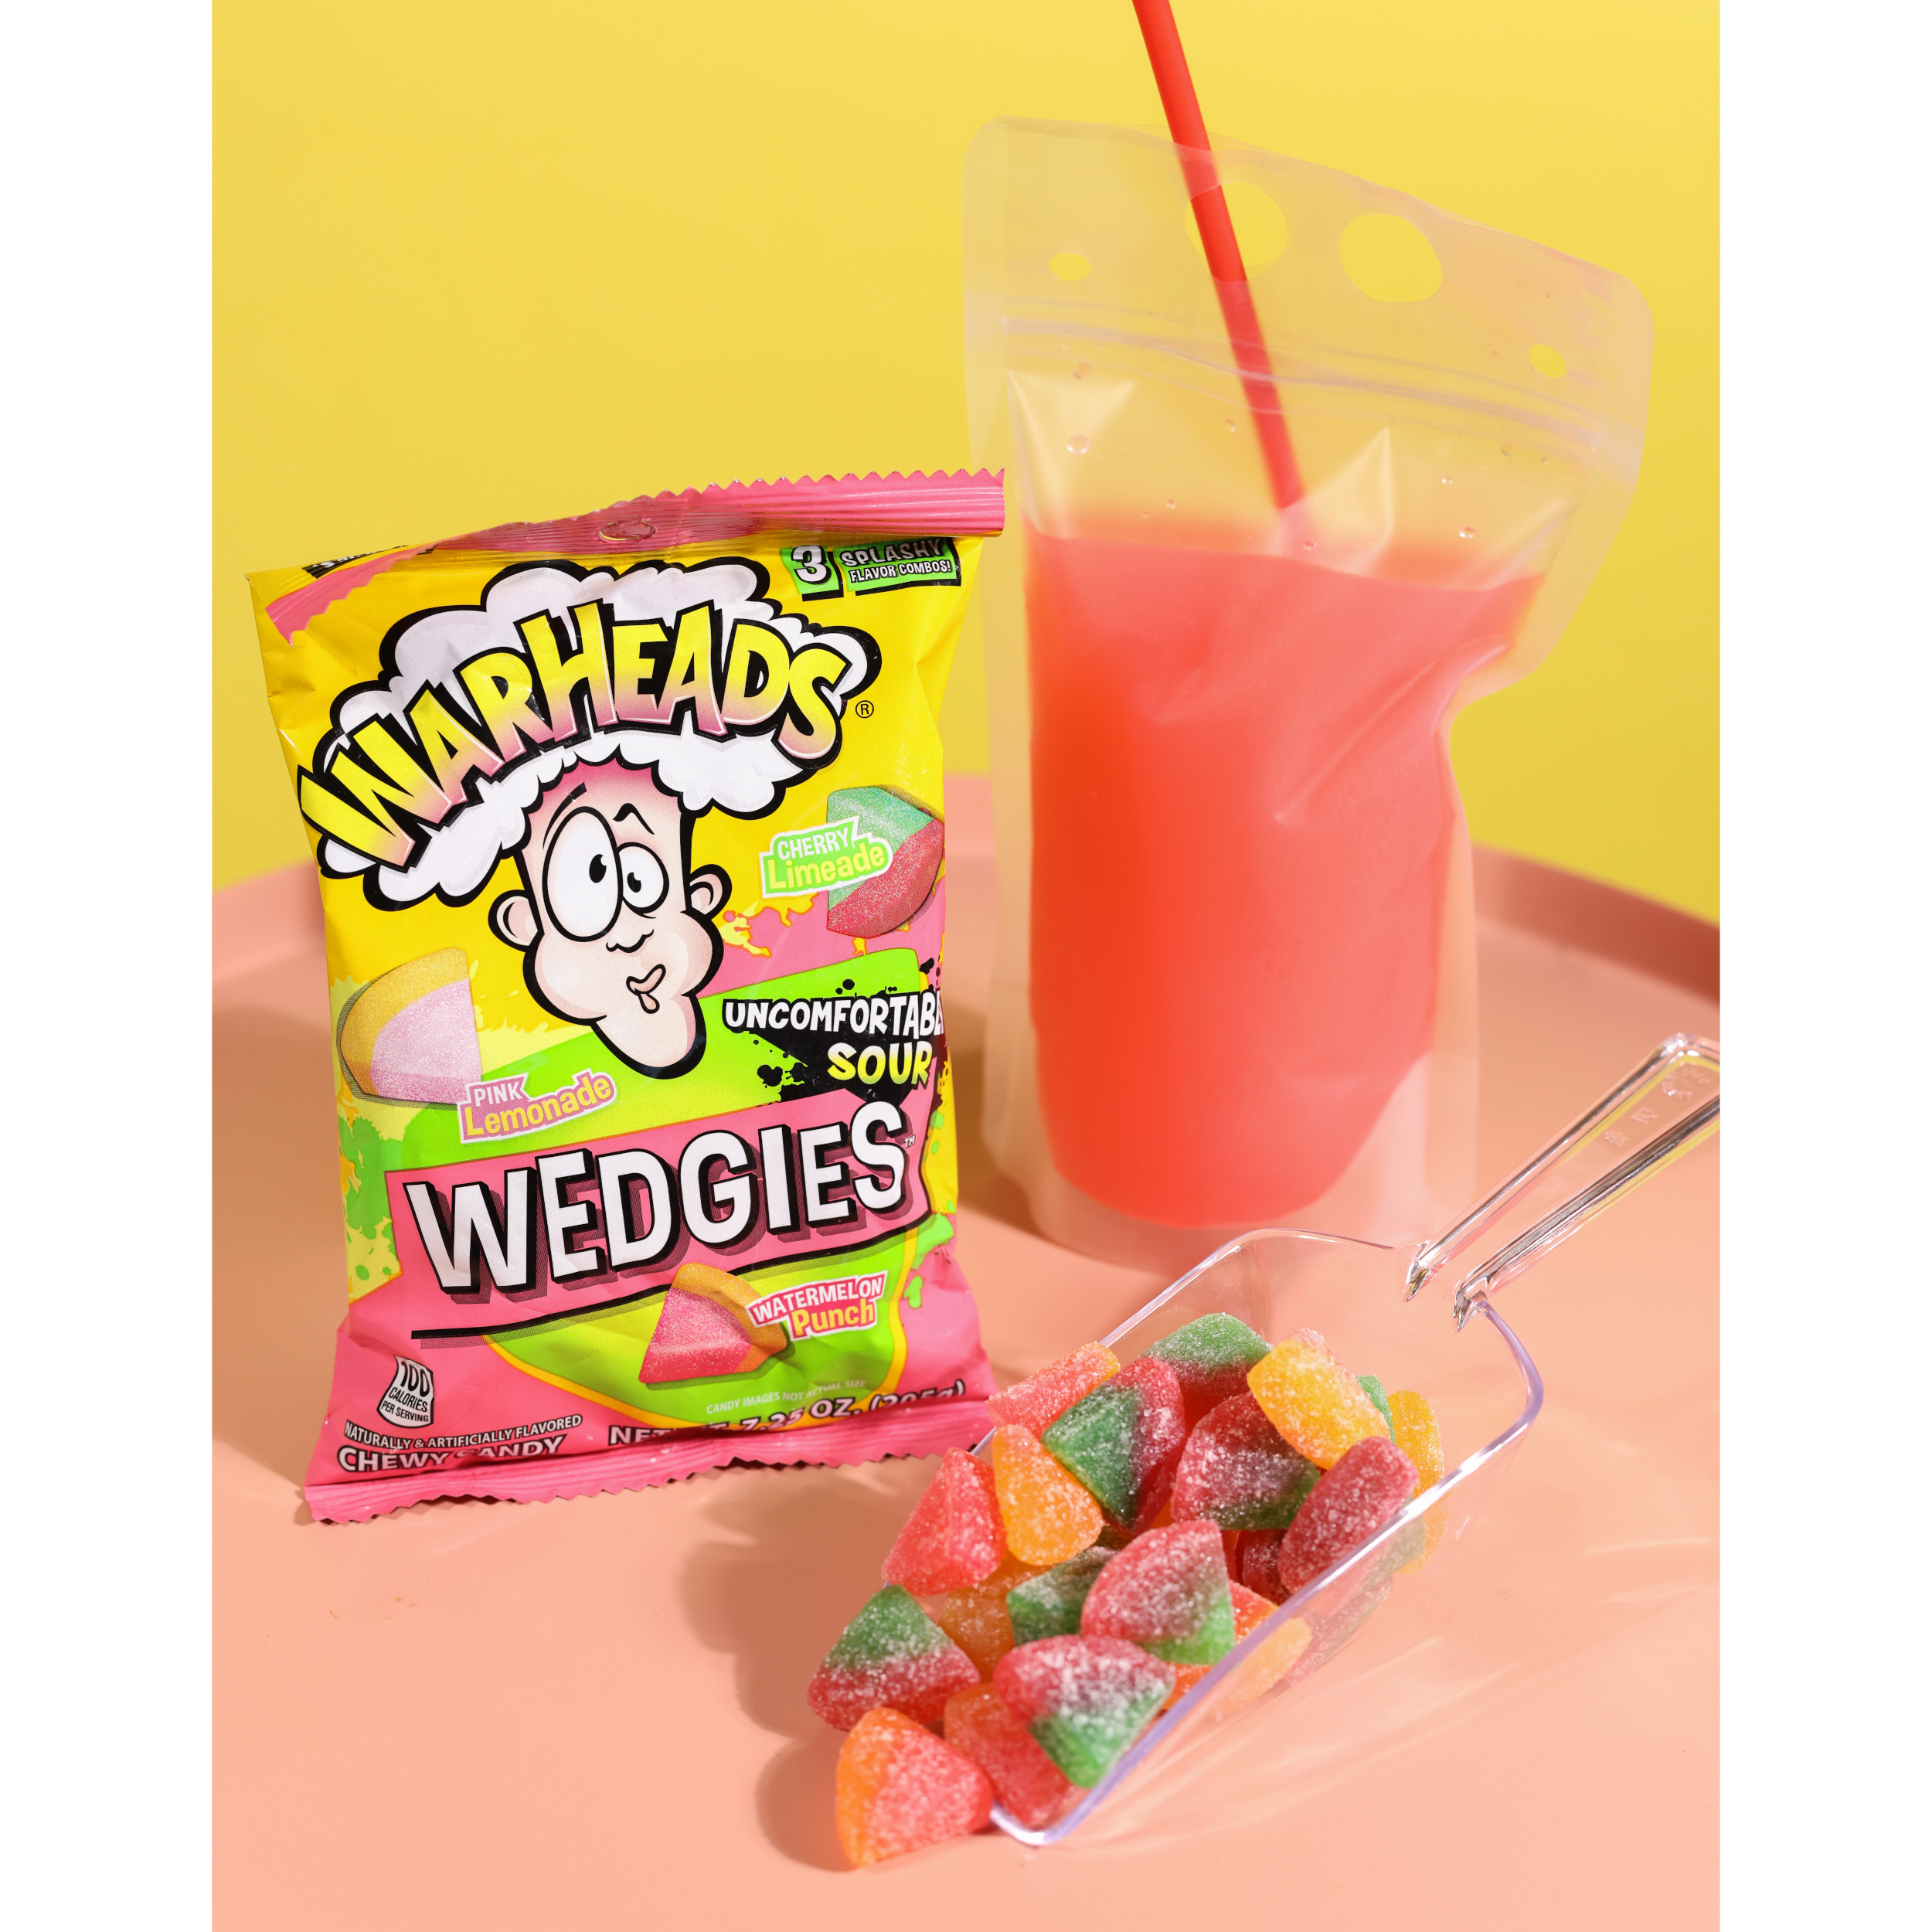 Warheads Wedgies Chewy Sour Candy, Assorted Flavors, 7.25oz - image 2 of 6